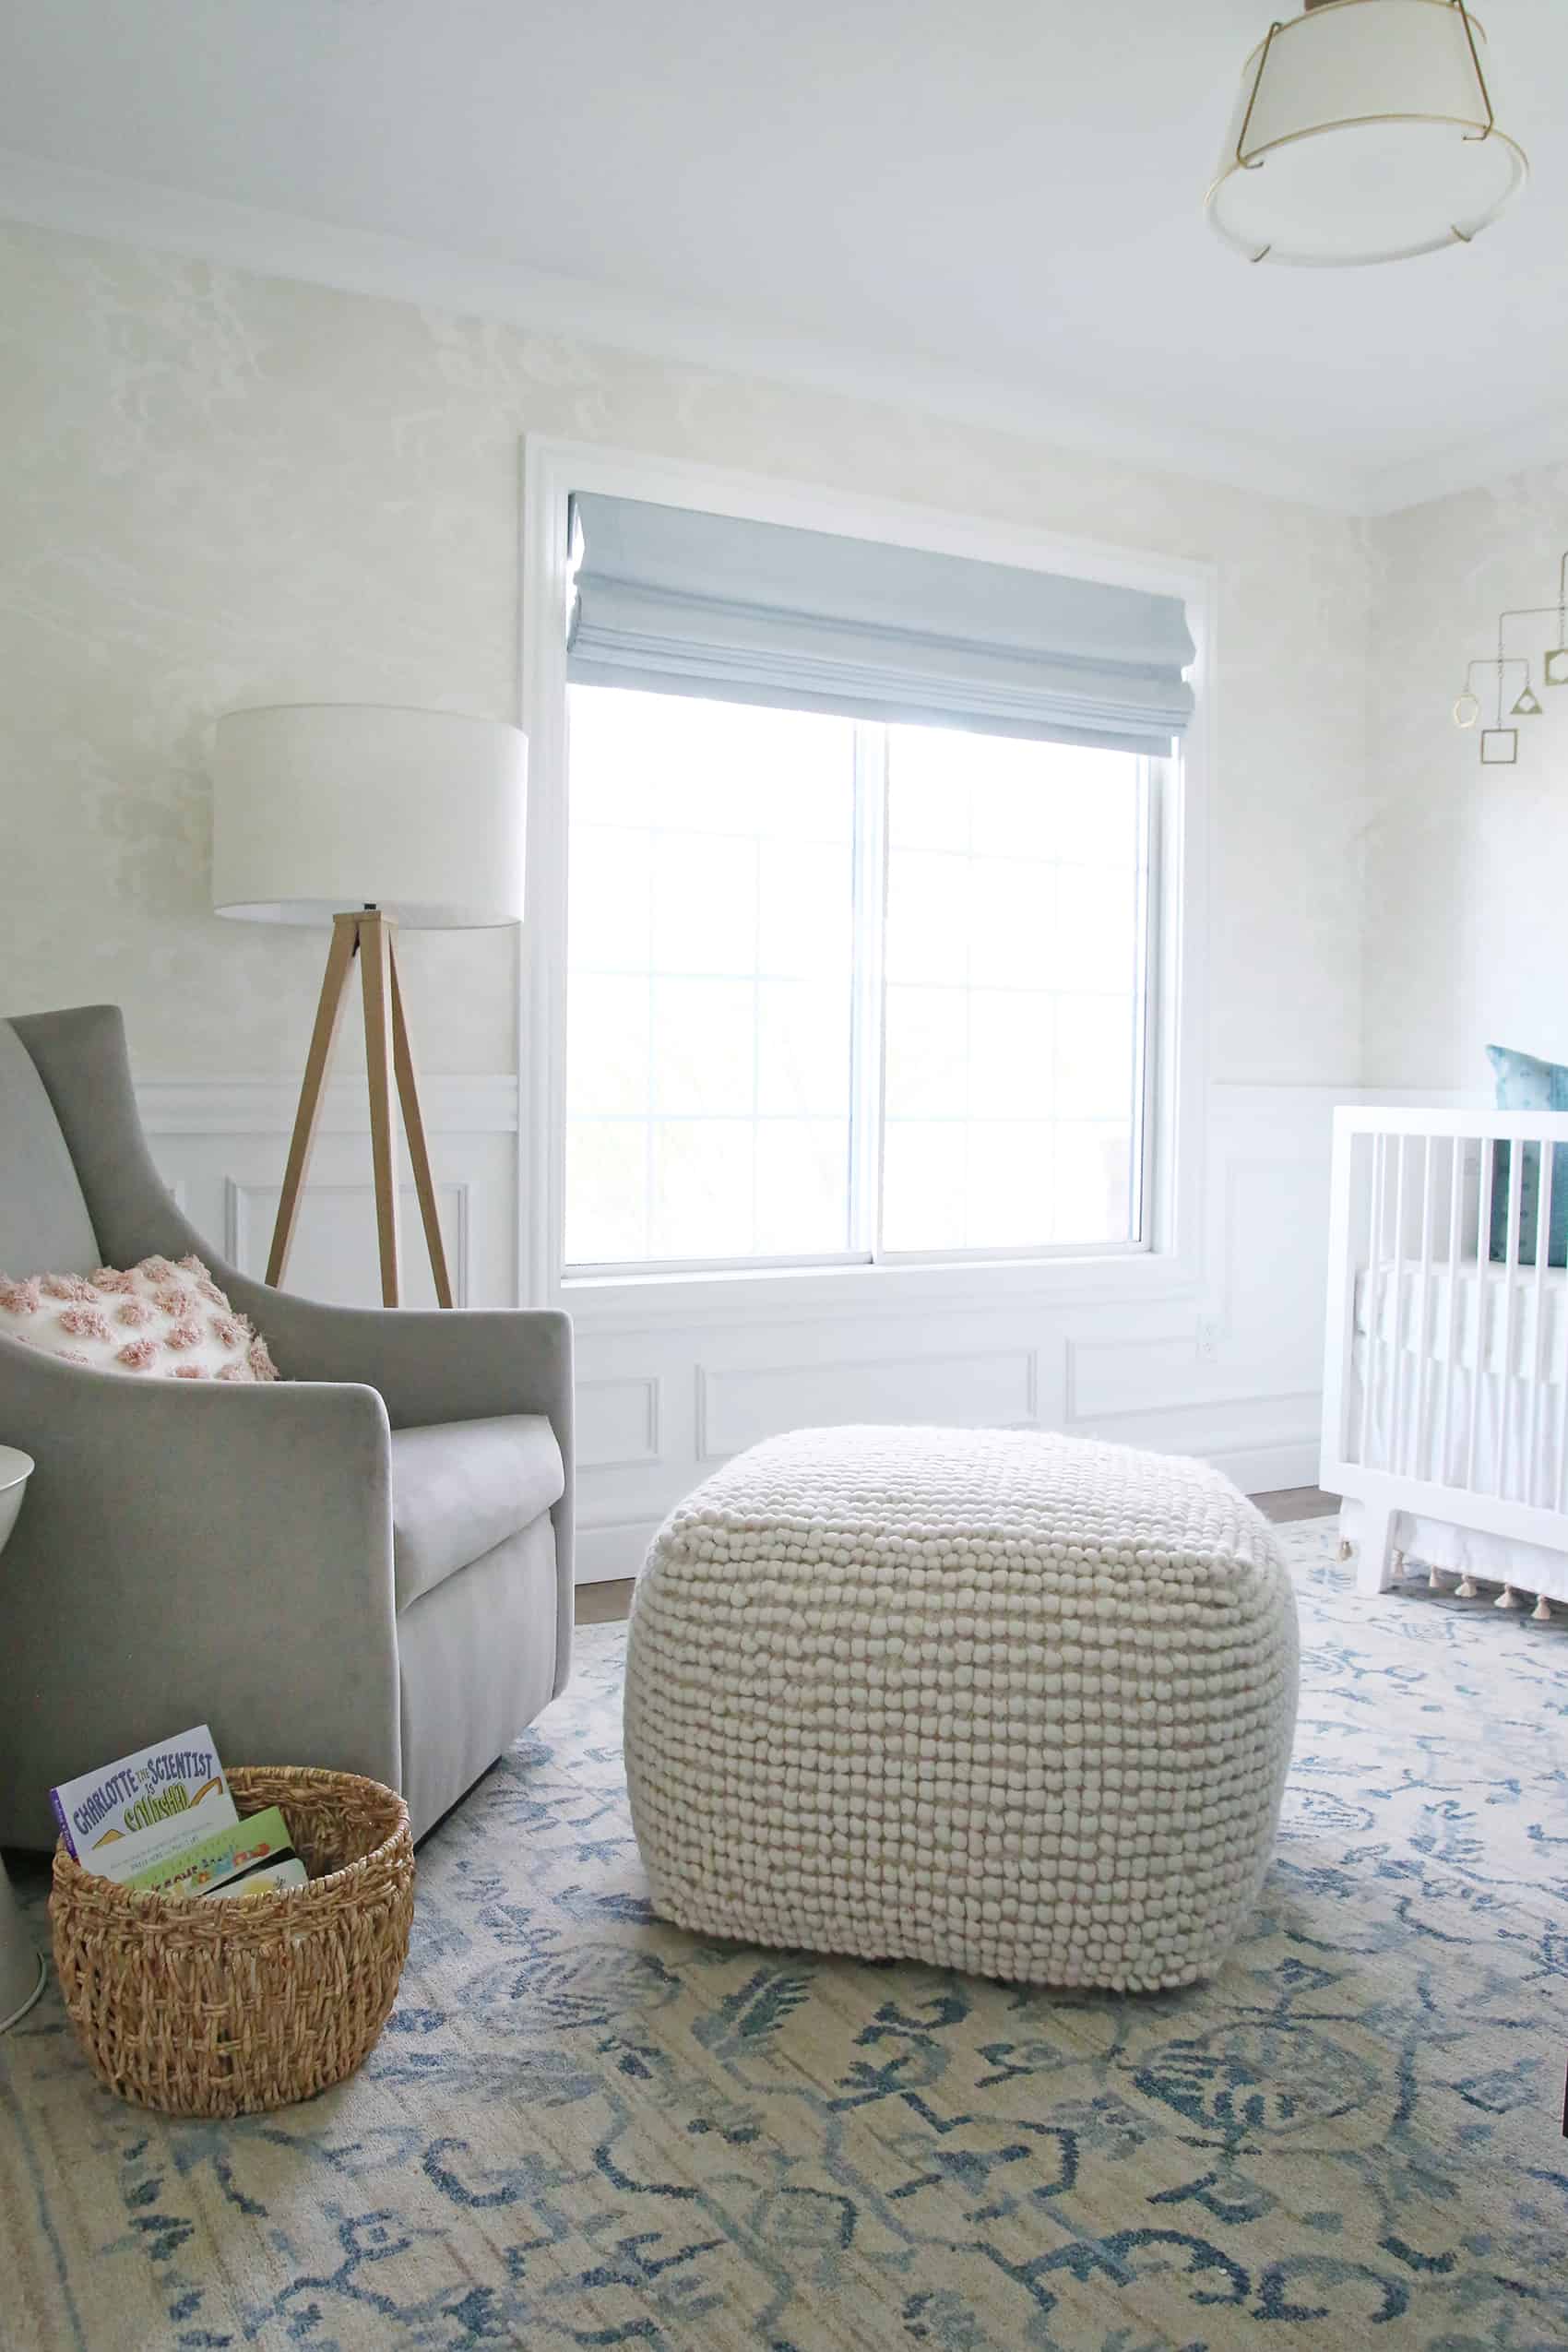 A wallpaper ideas for a nursery space on the nursery room with subtle cloud pattern 